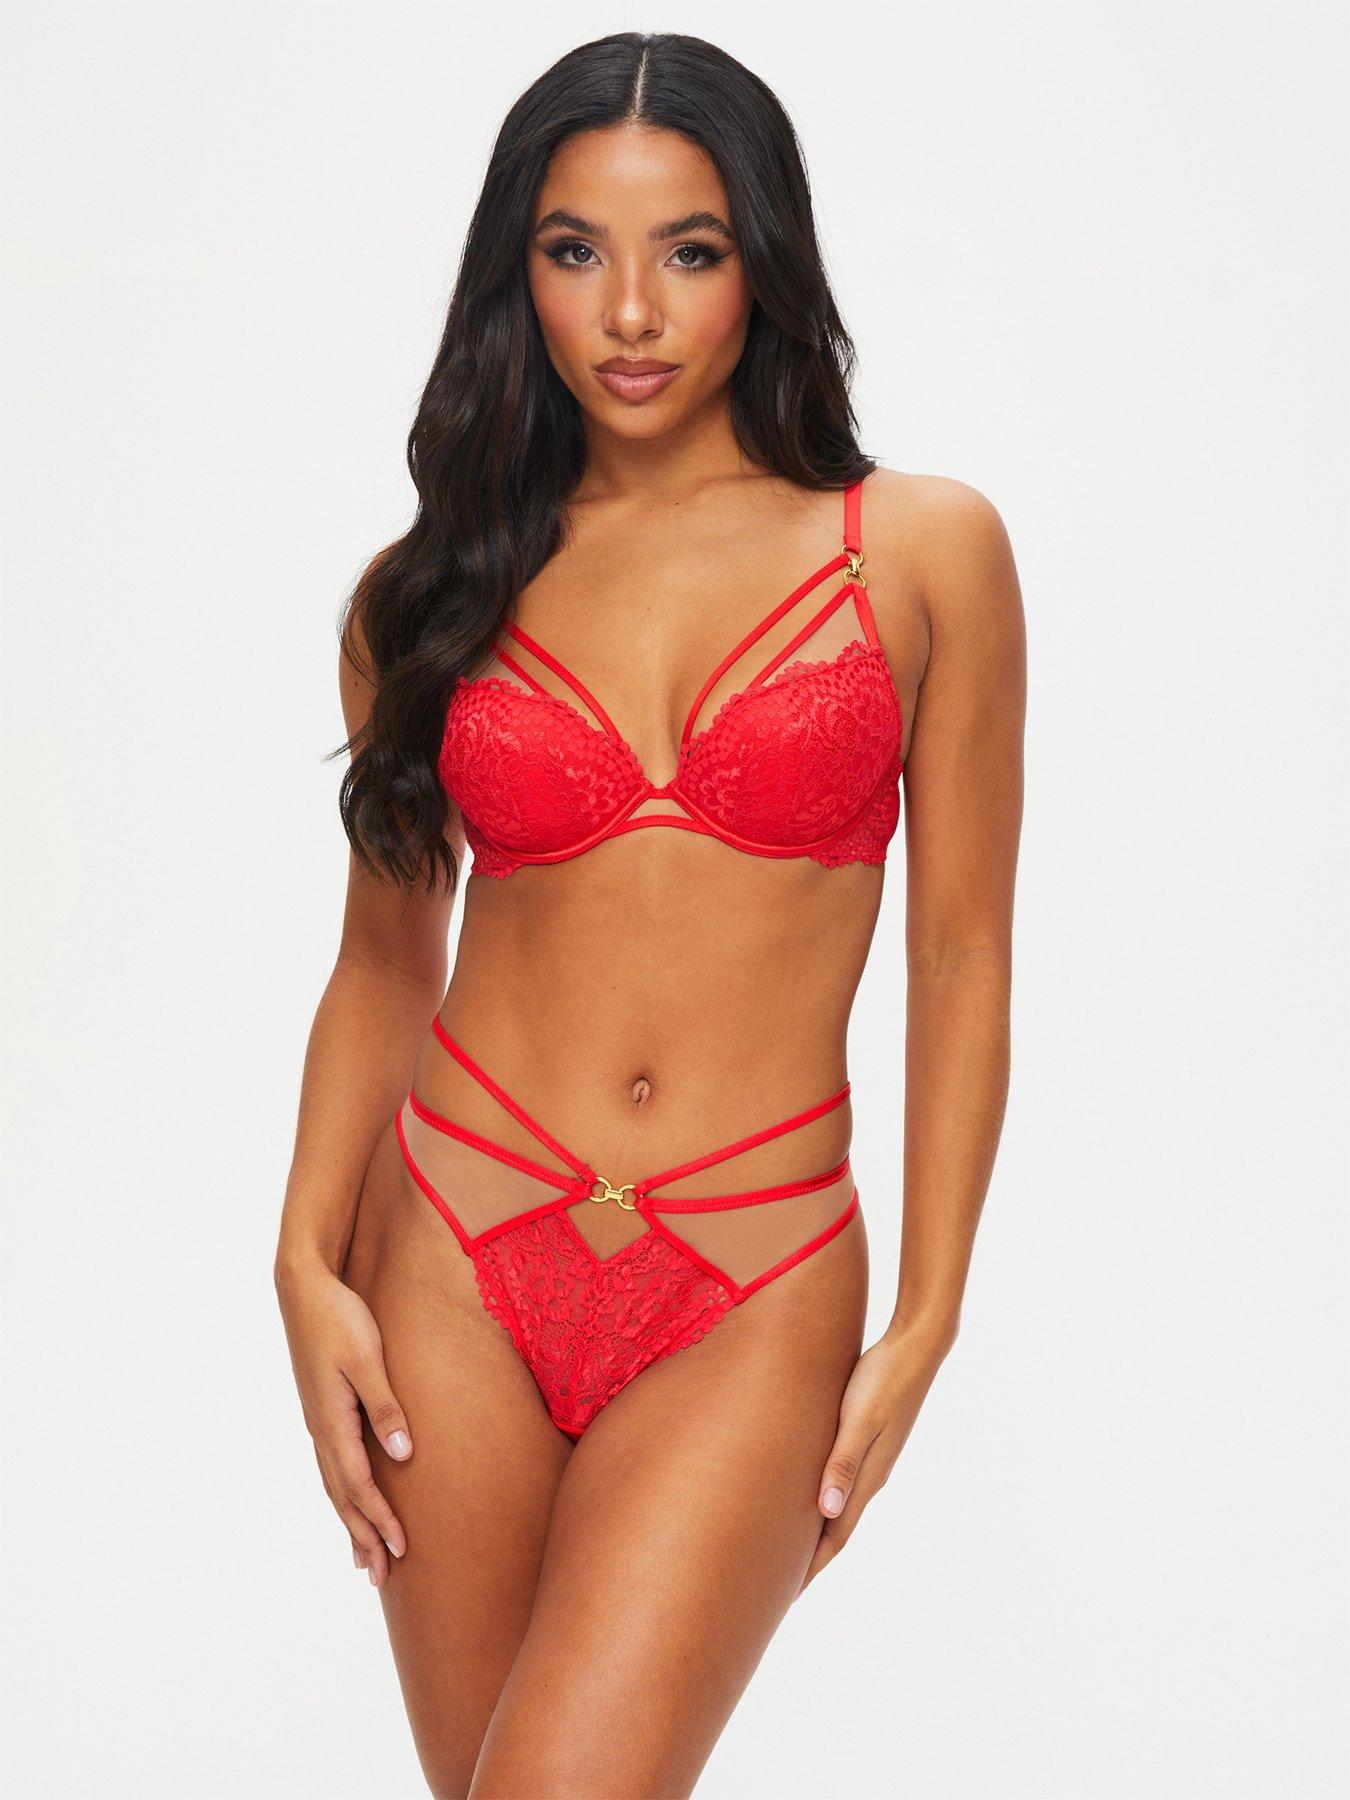 Ann Summers sexy lace balcony bra in red